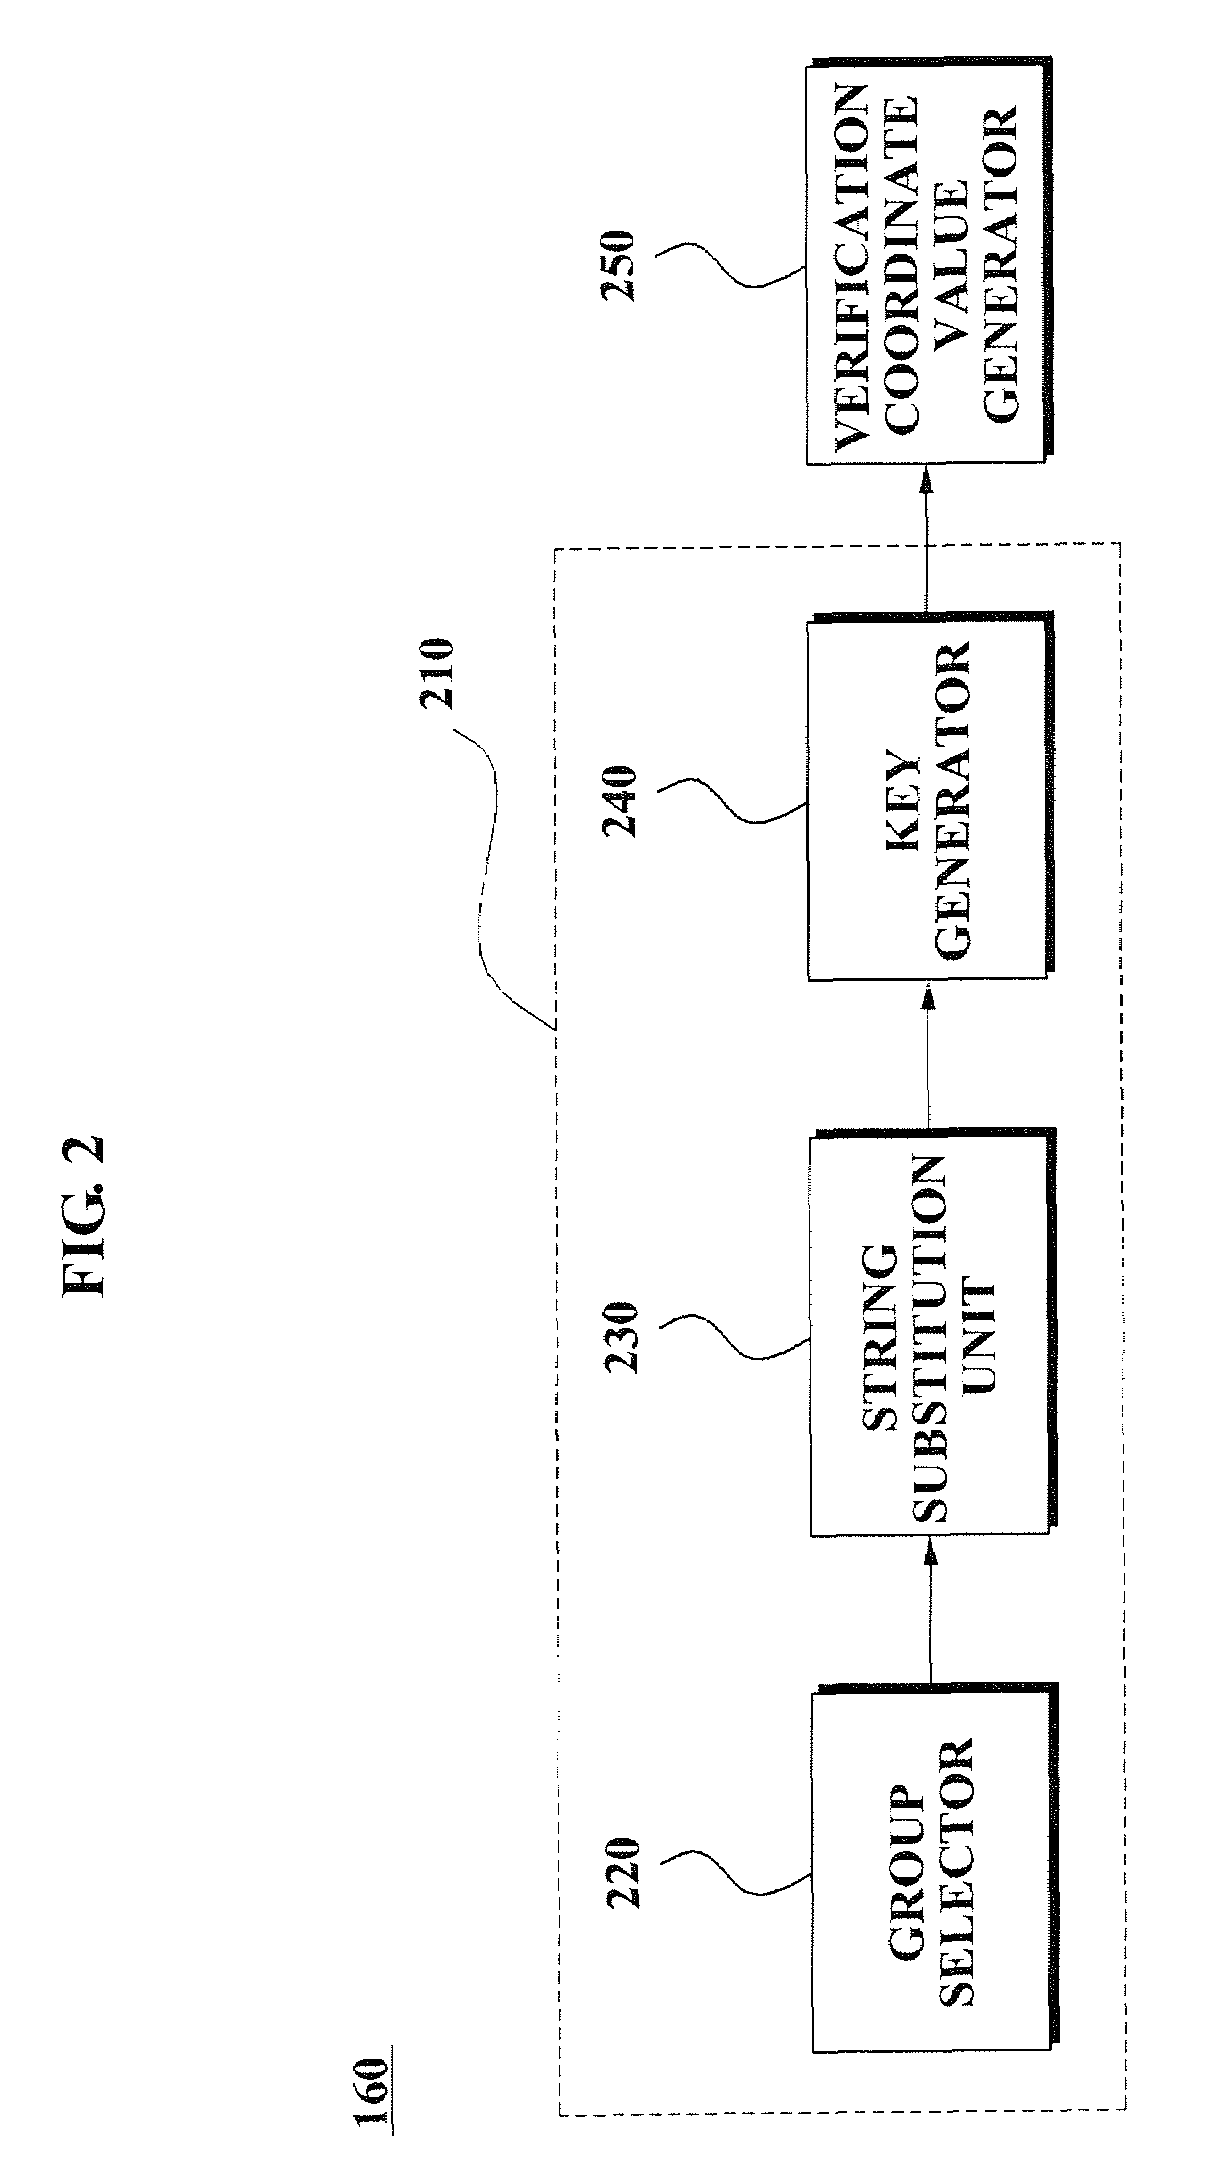 Apparatus for batch verification and method using the same